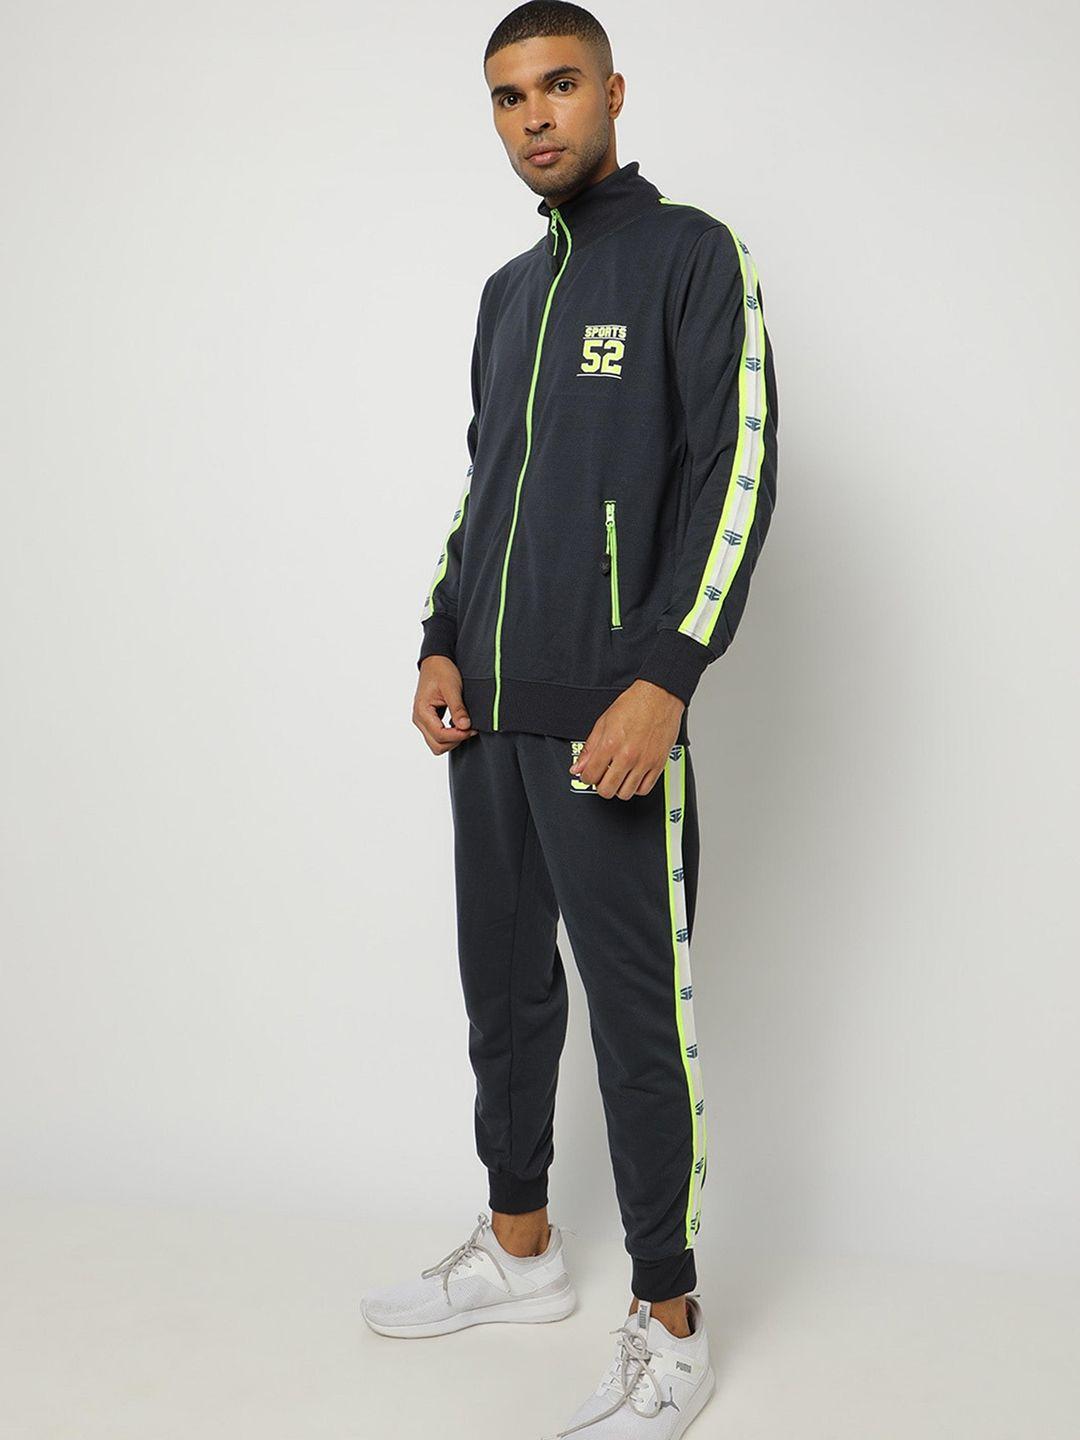 sports52 wear brand logo printed sports tracksuit with side taping